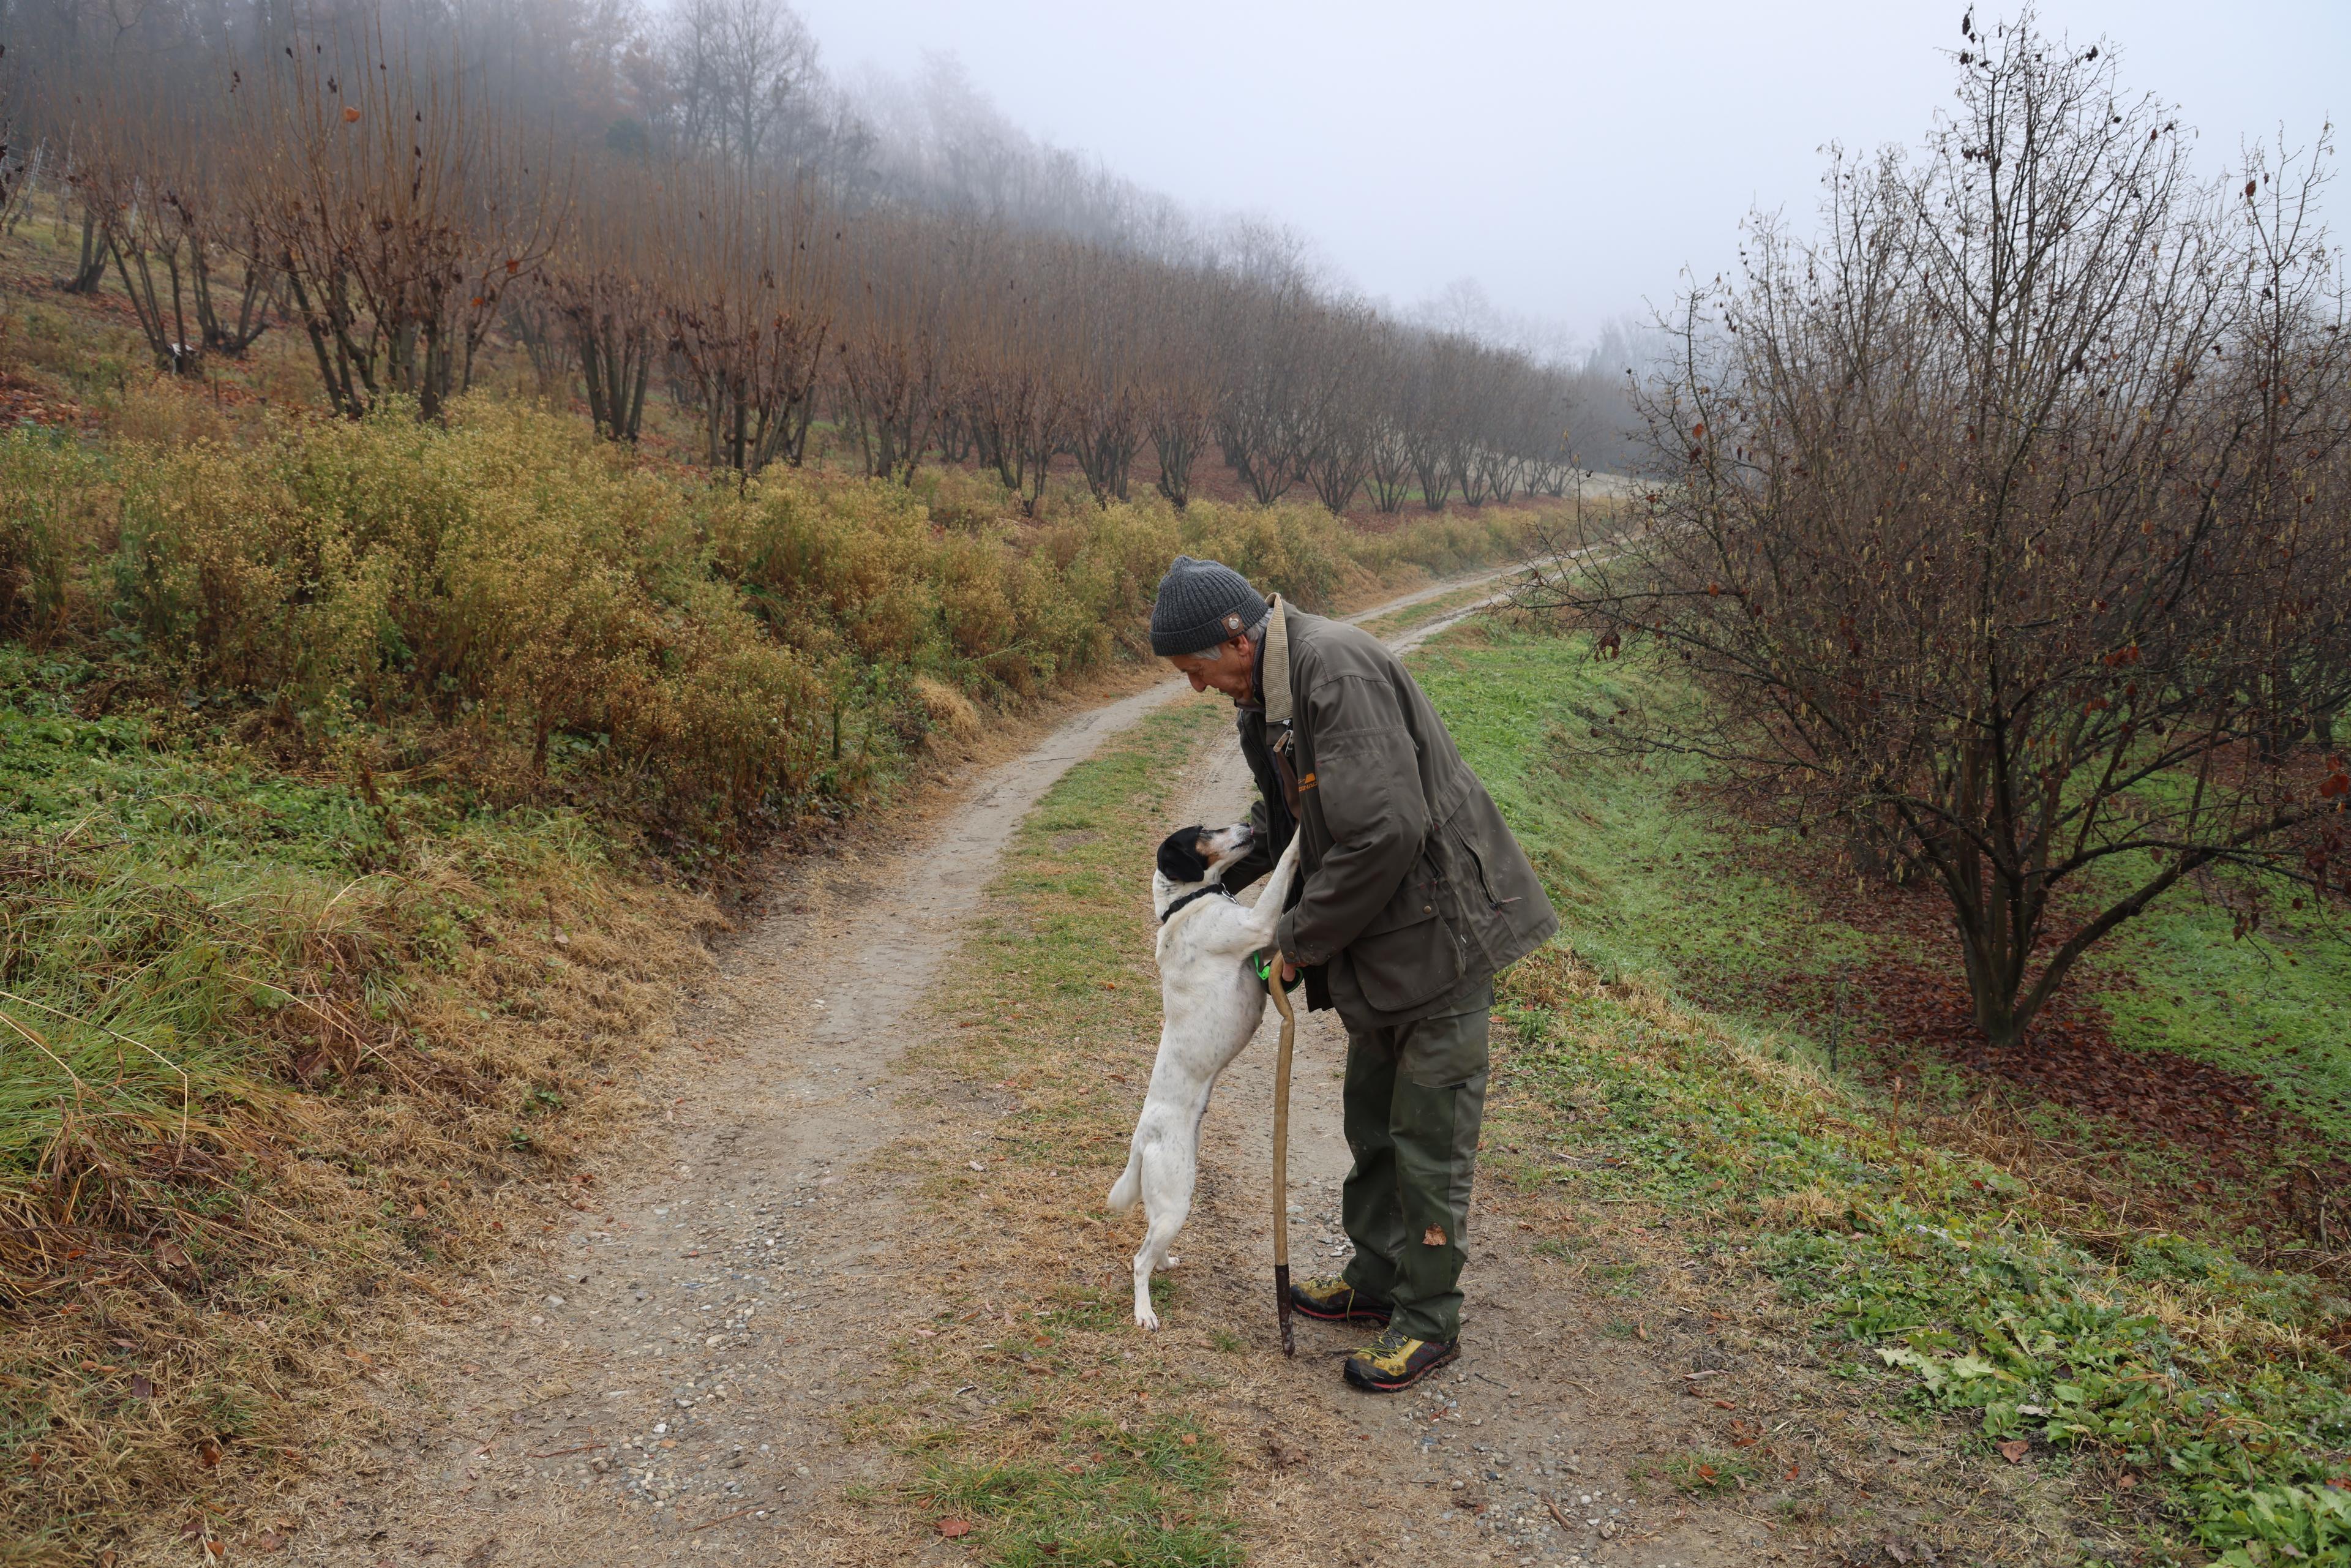 Truffle hunter and his dog on a dirt path in Piedmont, Italy